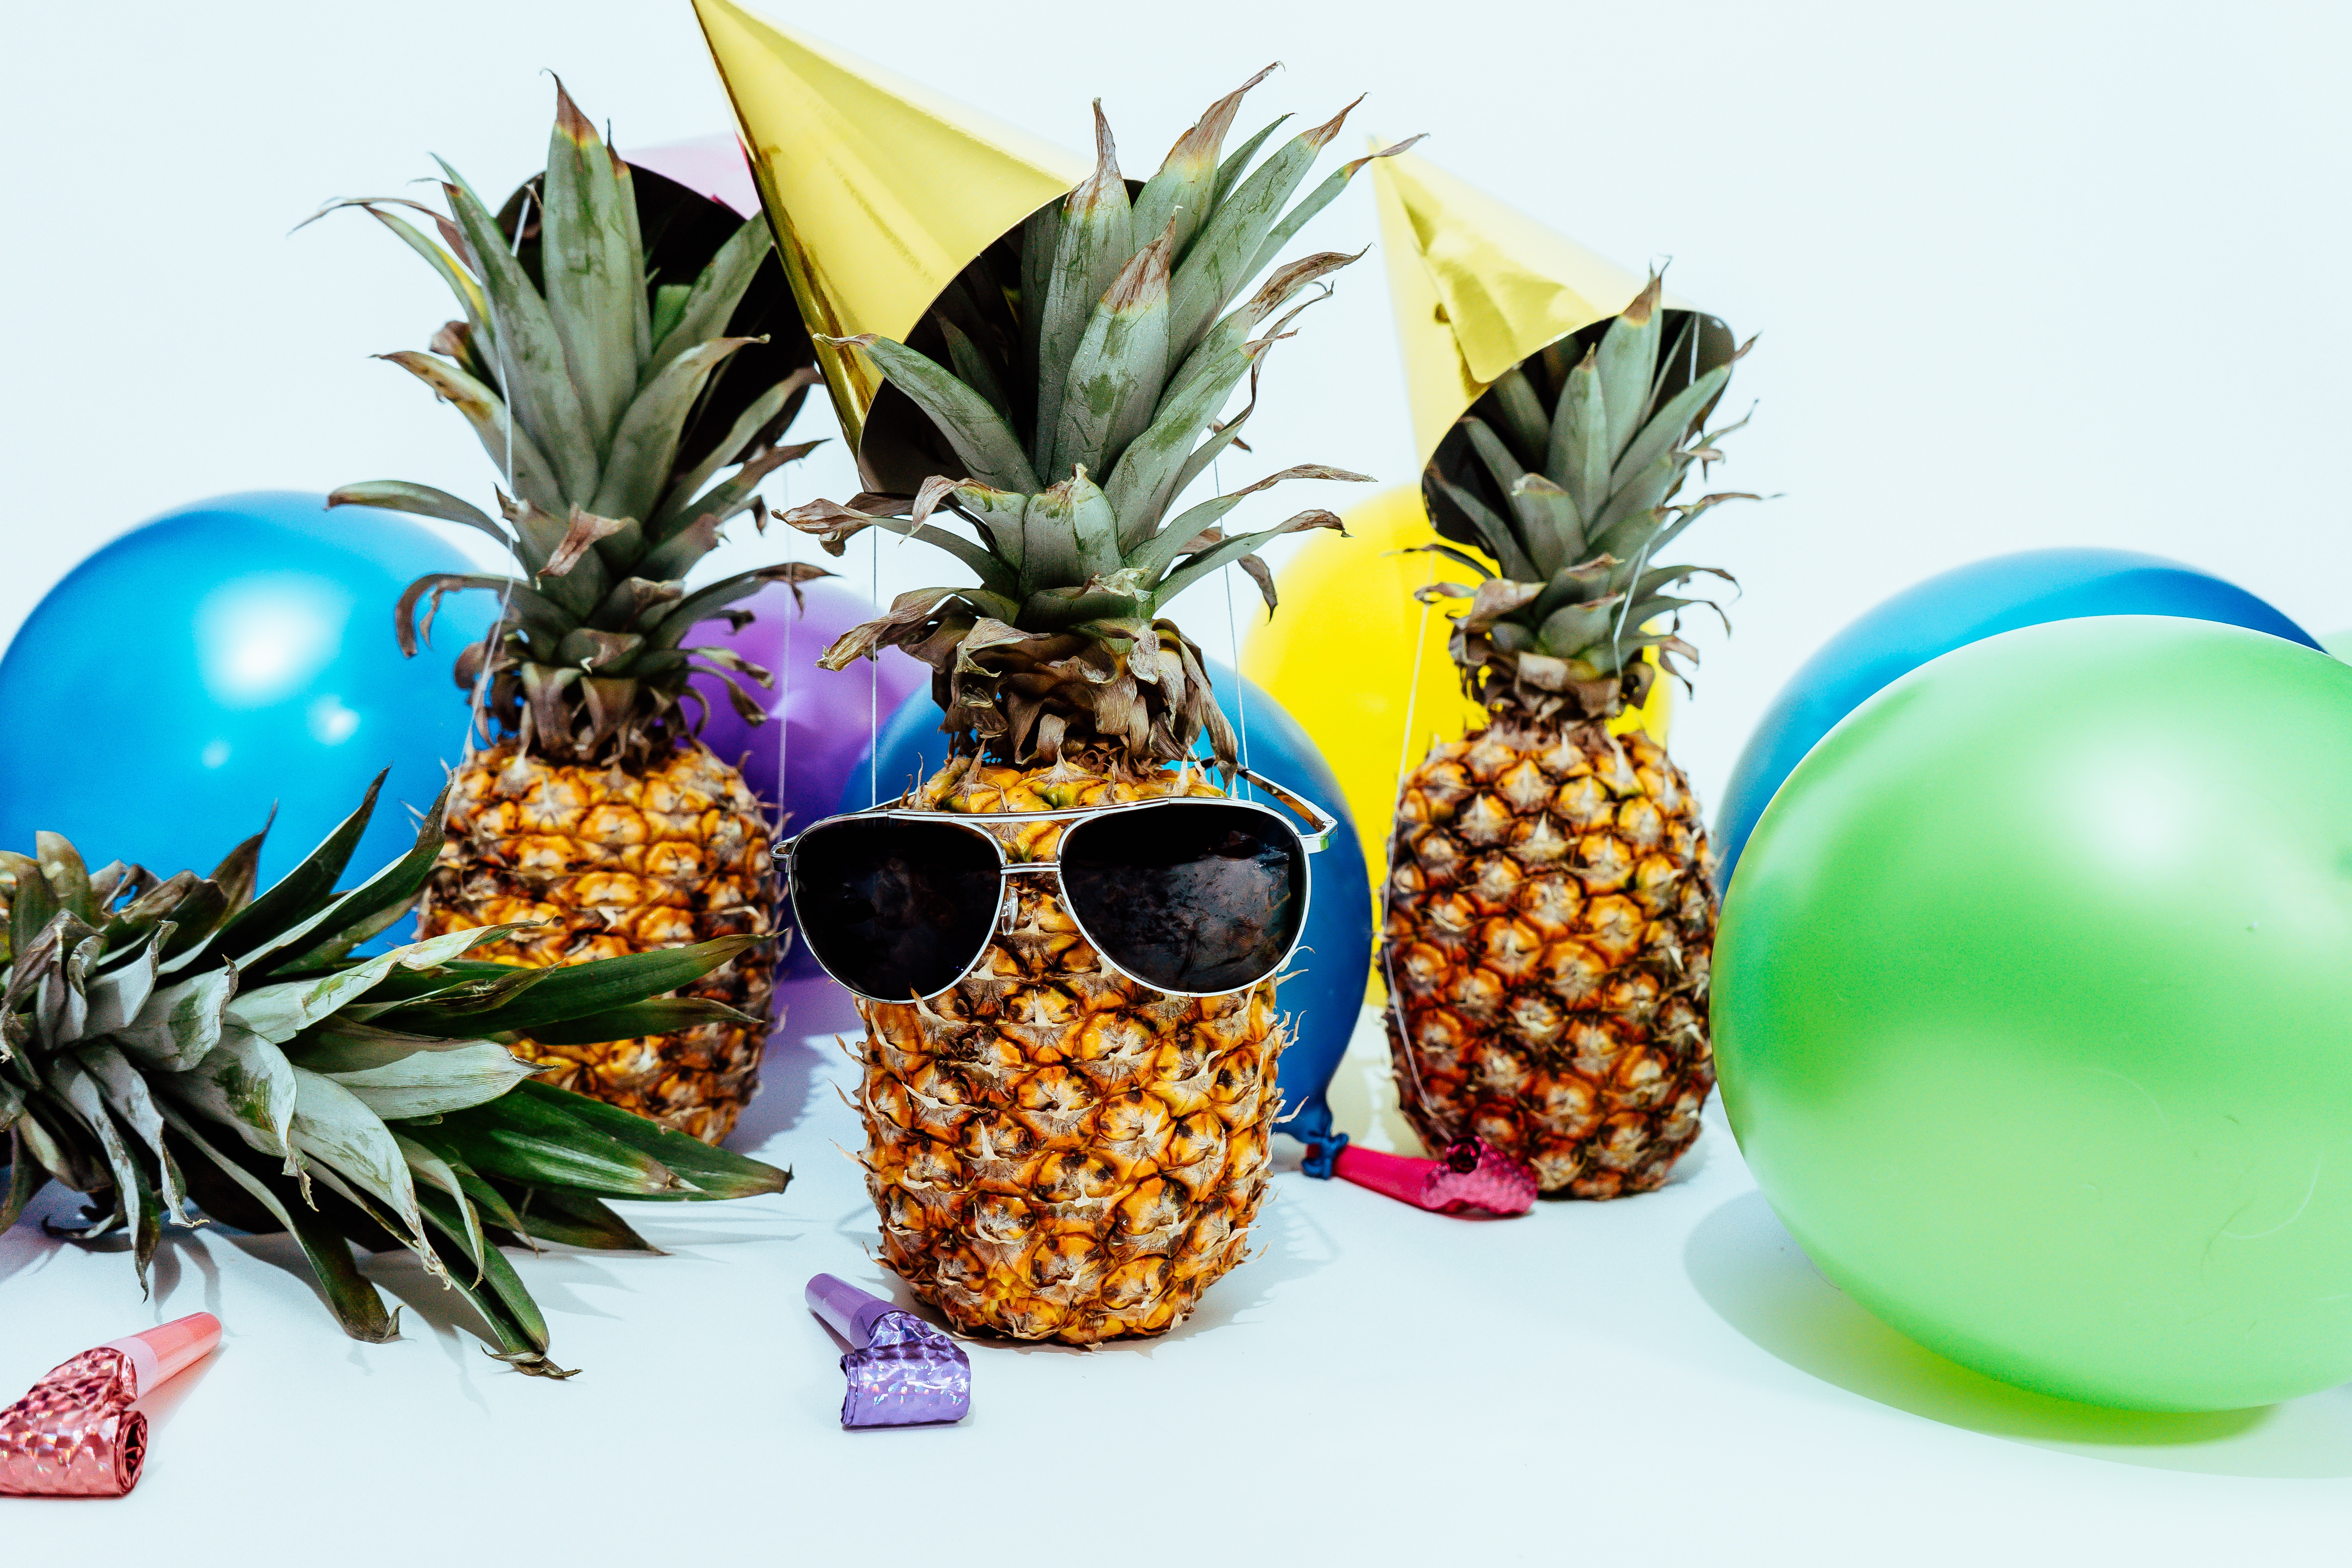 5777x3851 balloon, celebration, fun, golden, play, tropical, sunglass, happy birthday, summer, sunglasses, colour, healthy, party hat, Public domain image, colorful, pineapple, fruit, celebrate, squad, abstract, party. Mocah HD Wallpaper